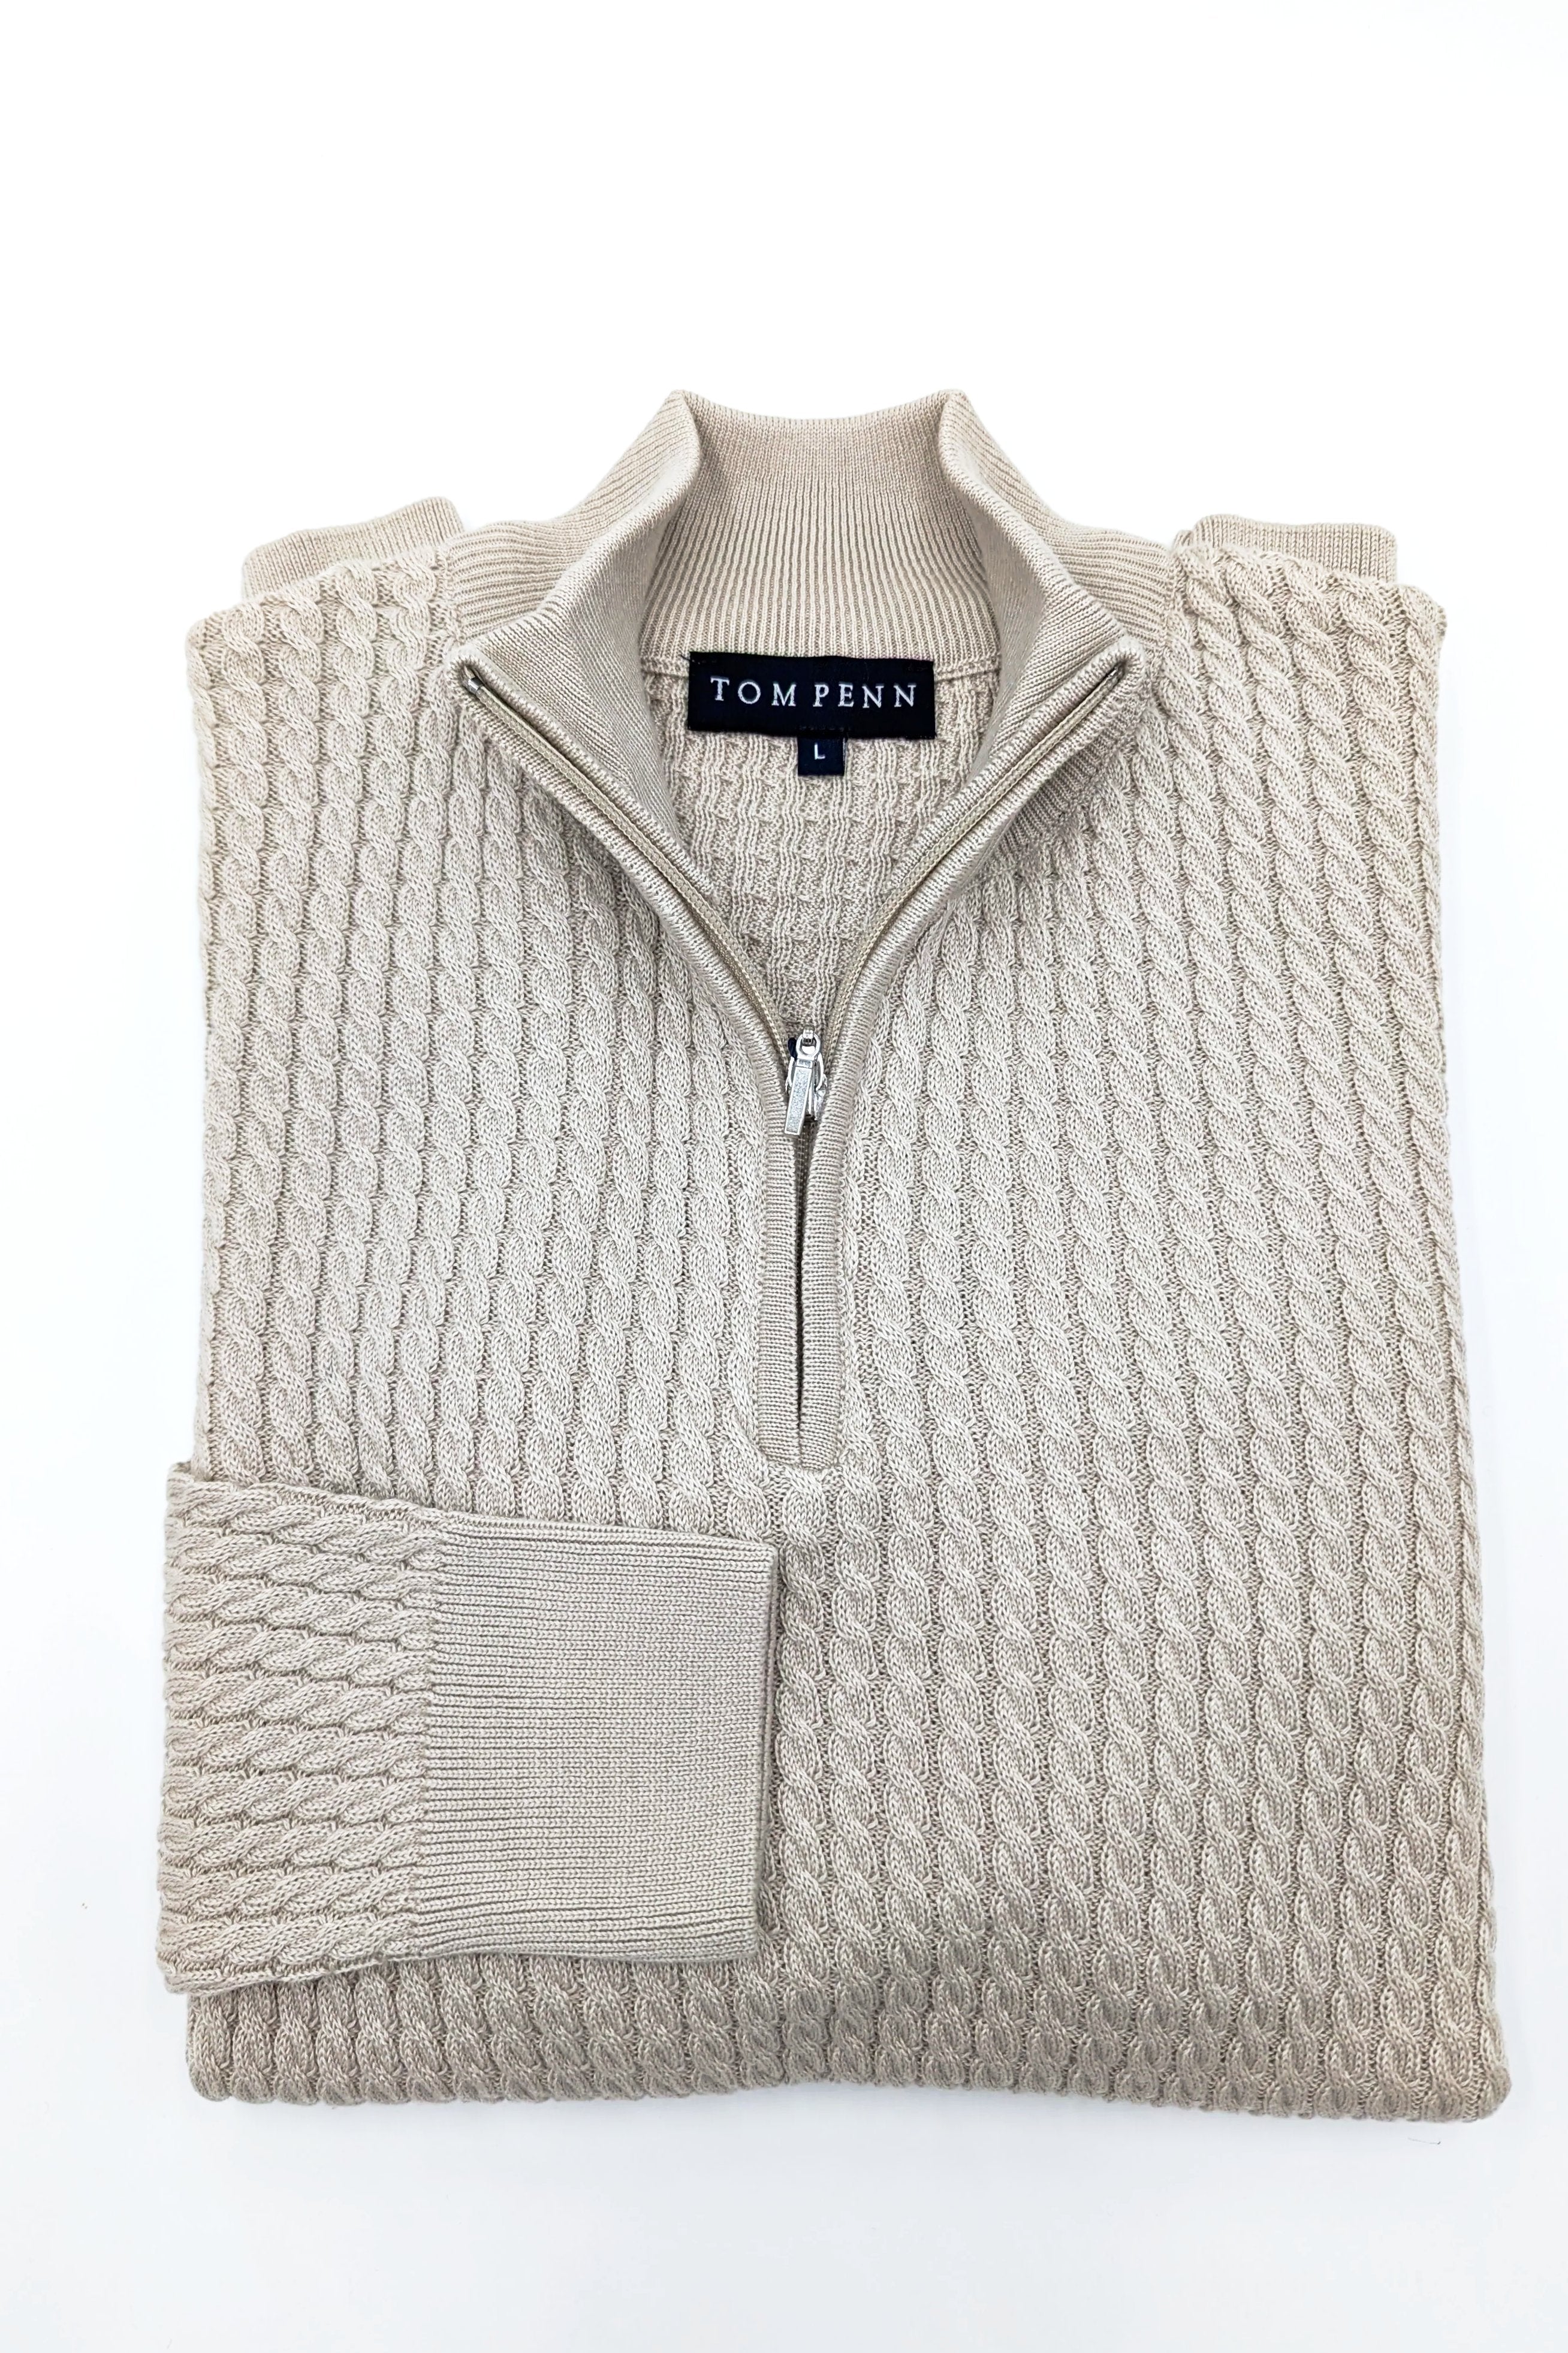 Men's 1/2 zip cable knit design tailored Fit oatmeal long sleeve jumper by Tom Penn.